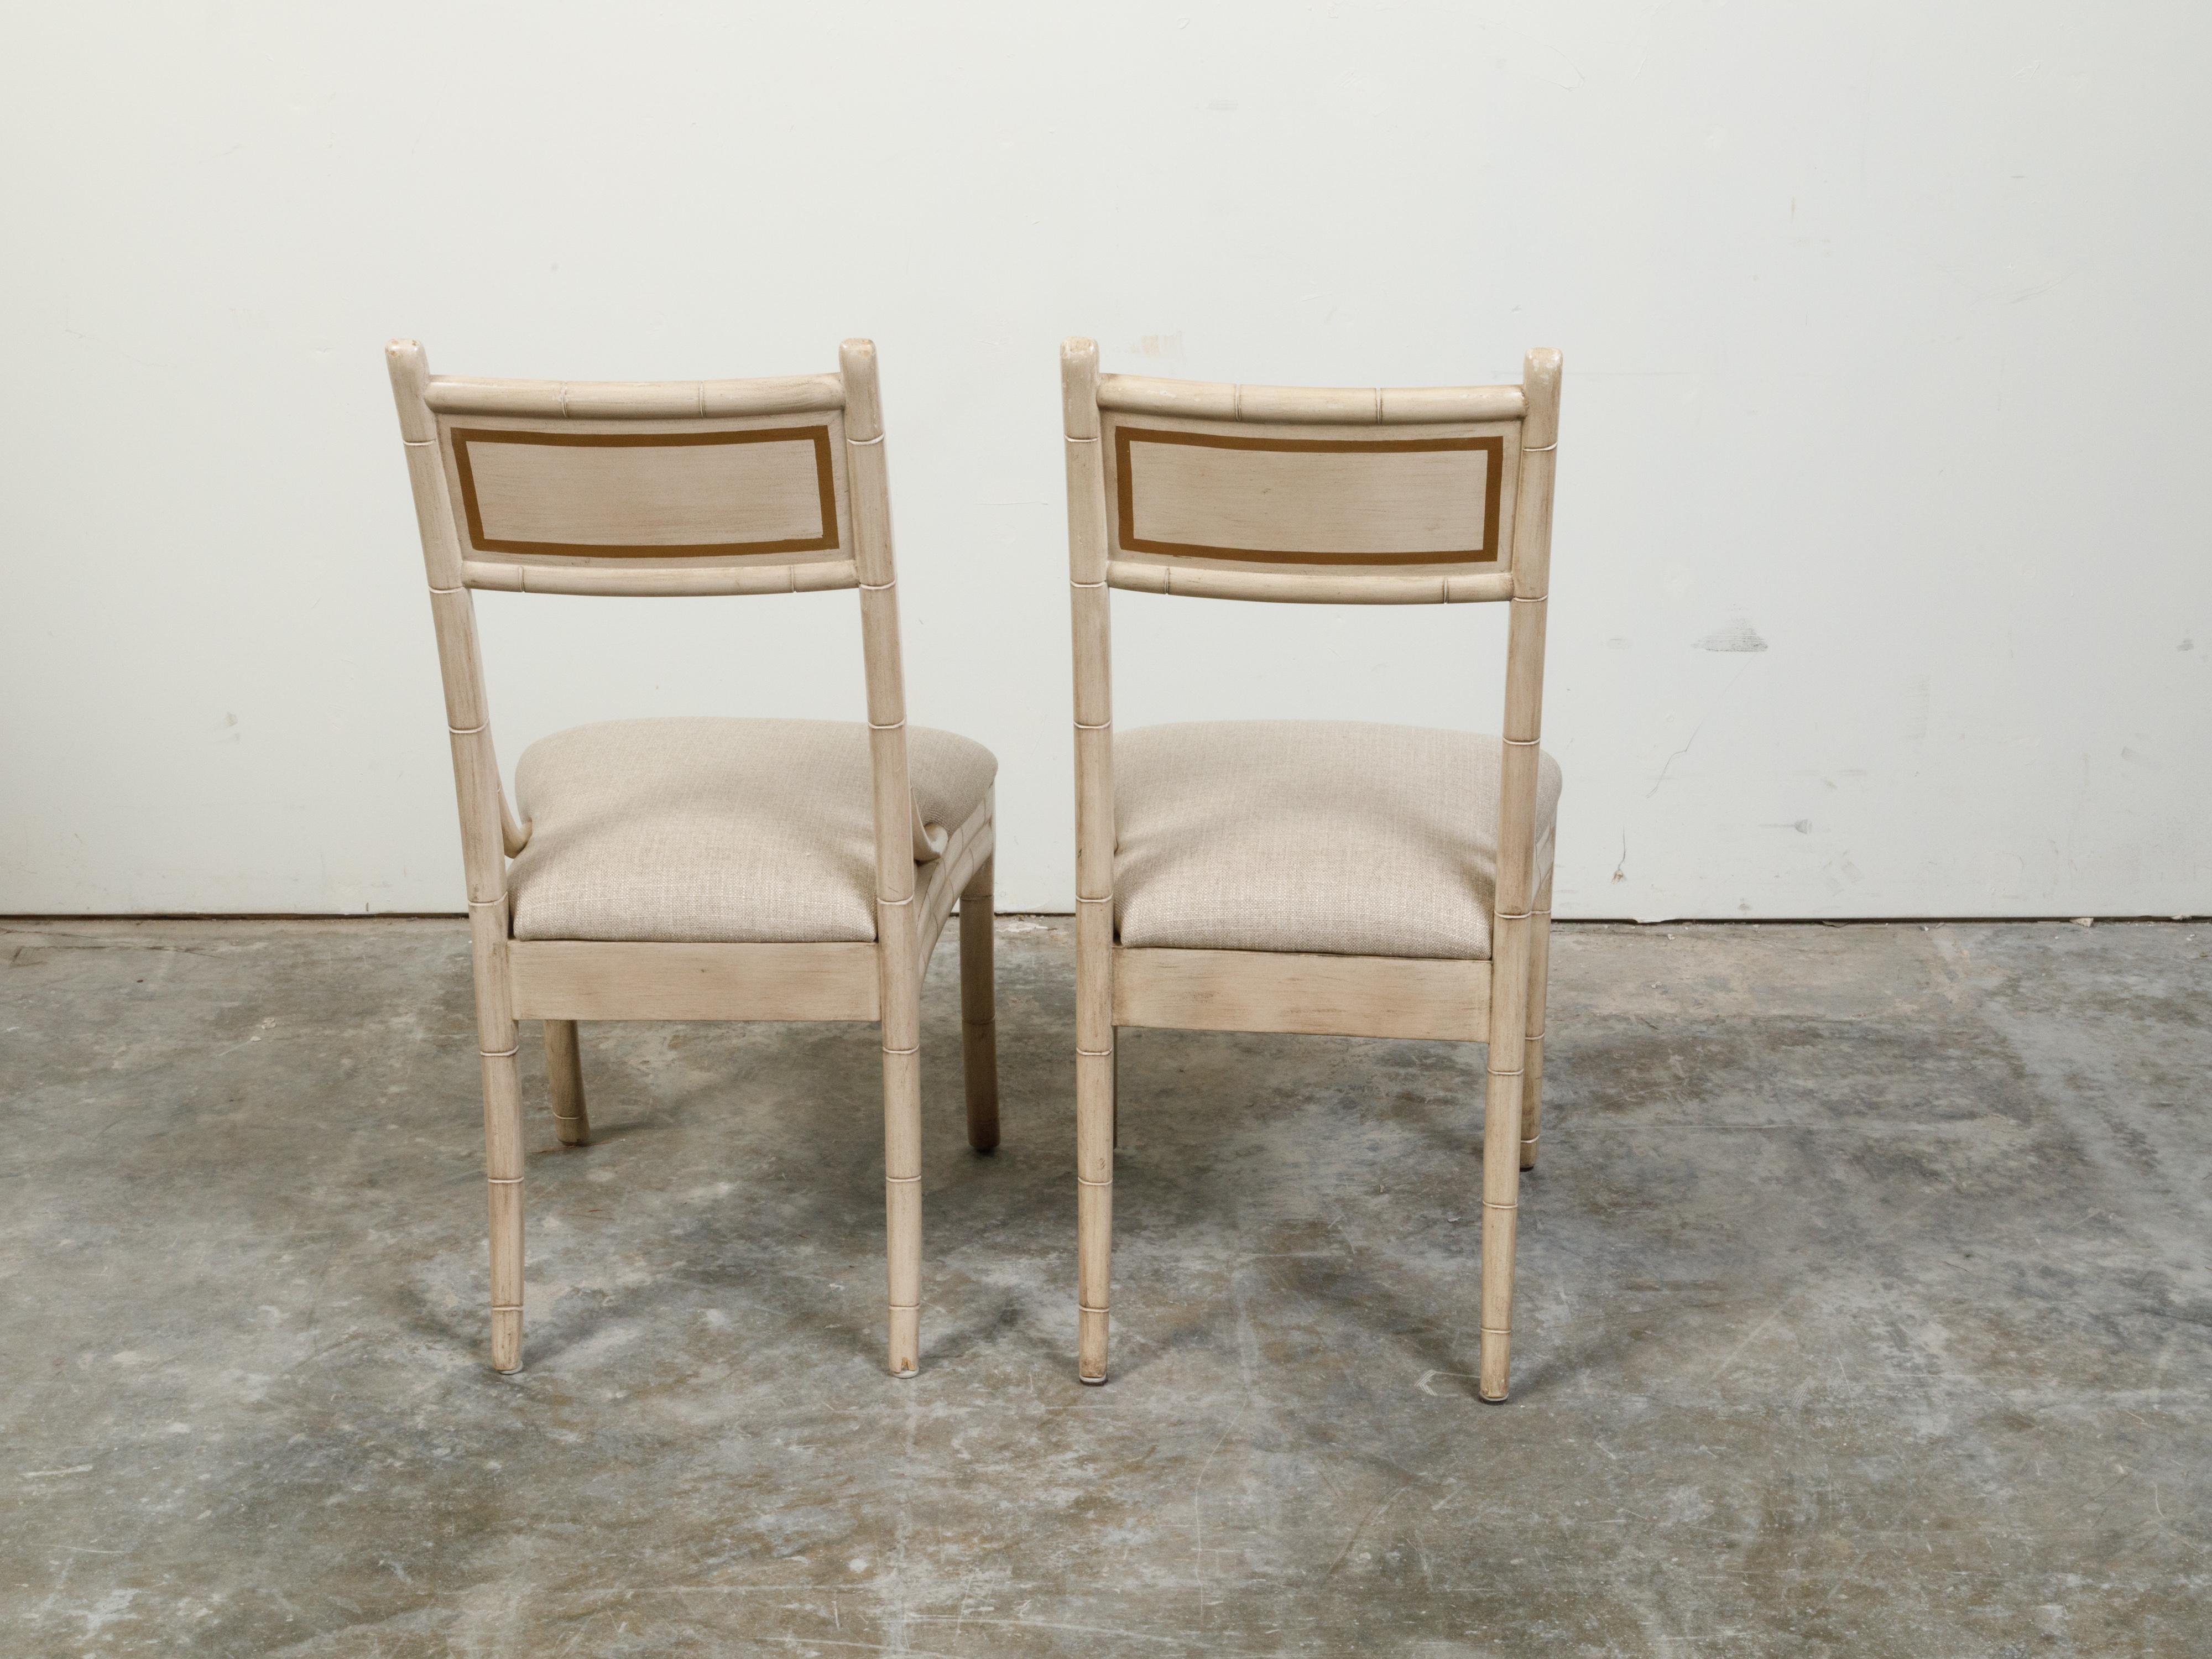 20th Century Pair of Midcentury Faux Bamboo Side Chairs with Saber Legs and New Upholstery For Sale